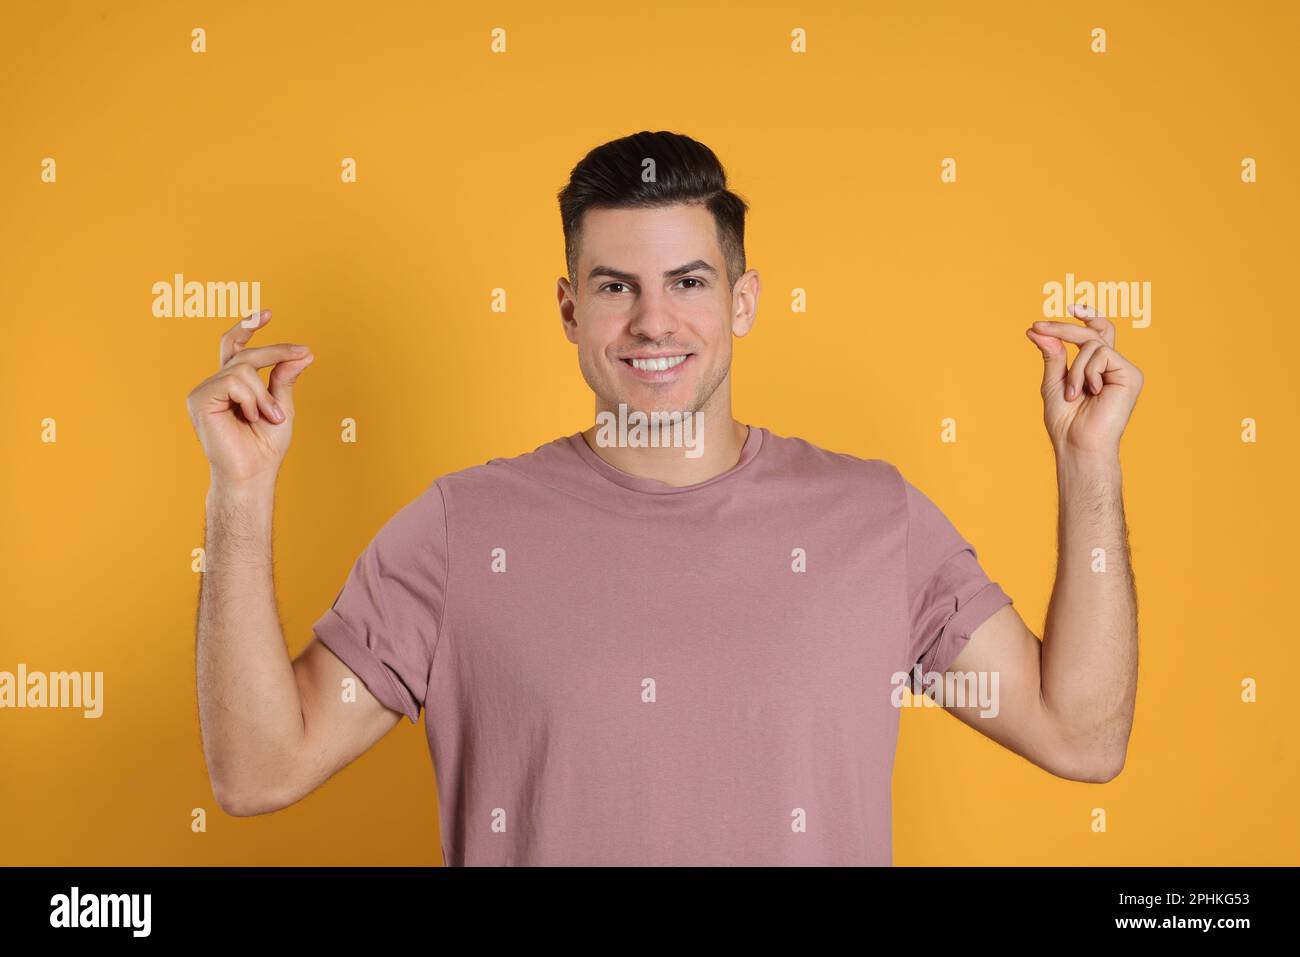 Handsome man snapping fingers on yellow background Stock Photo